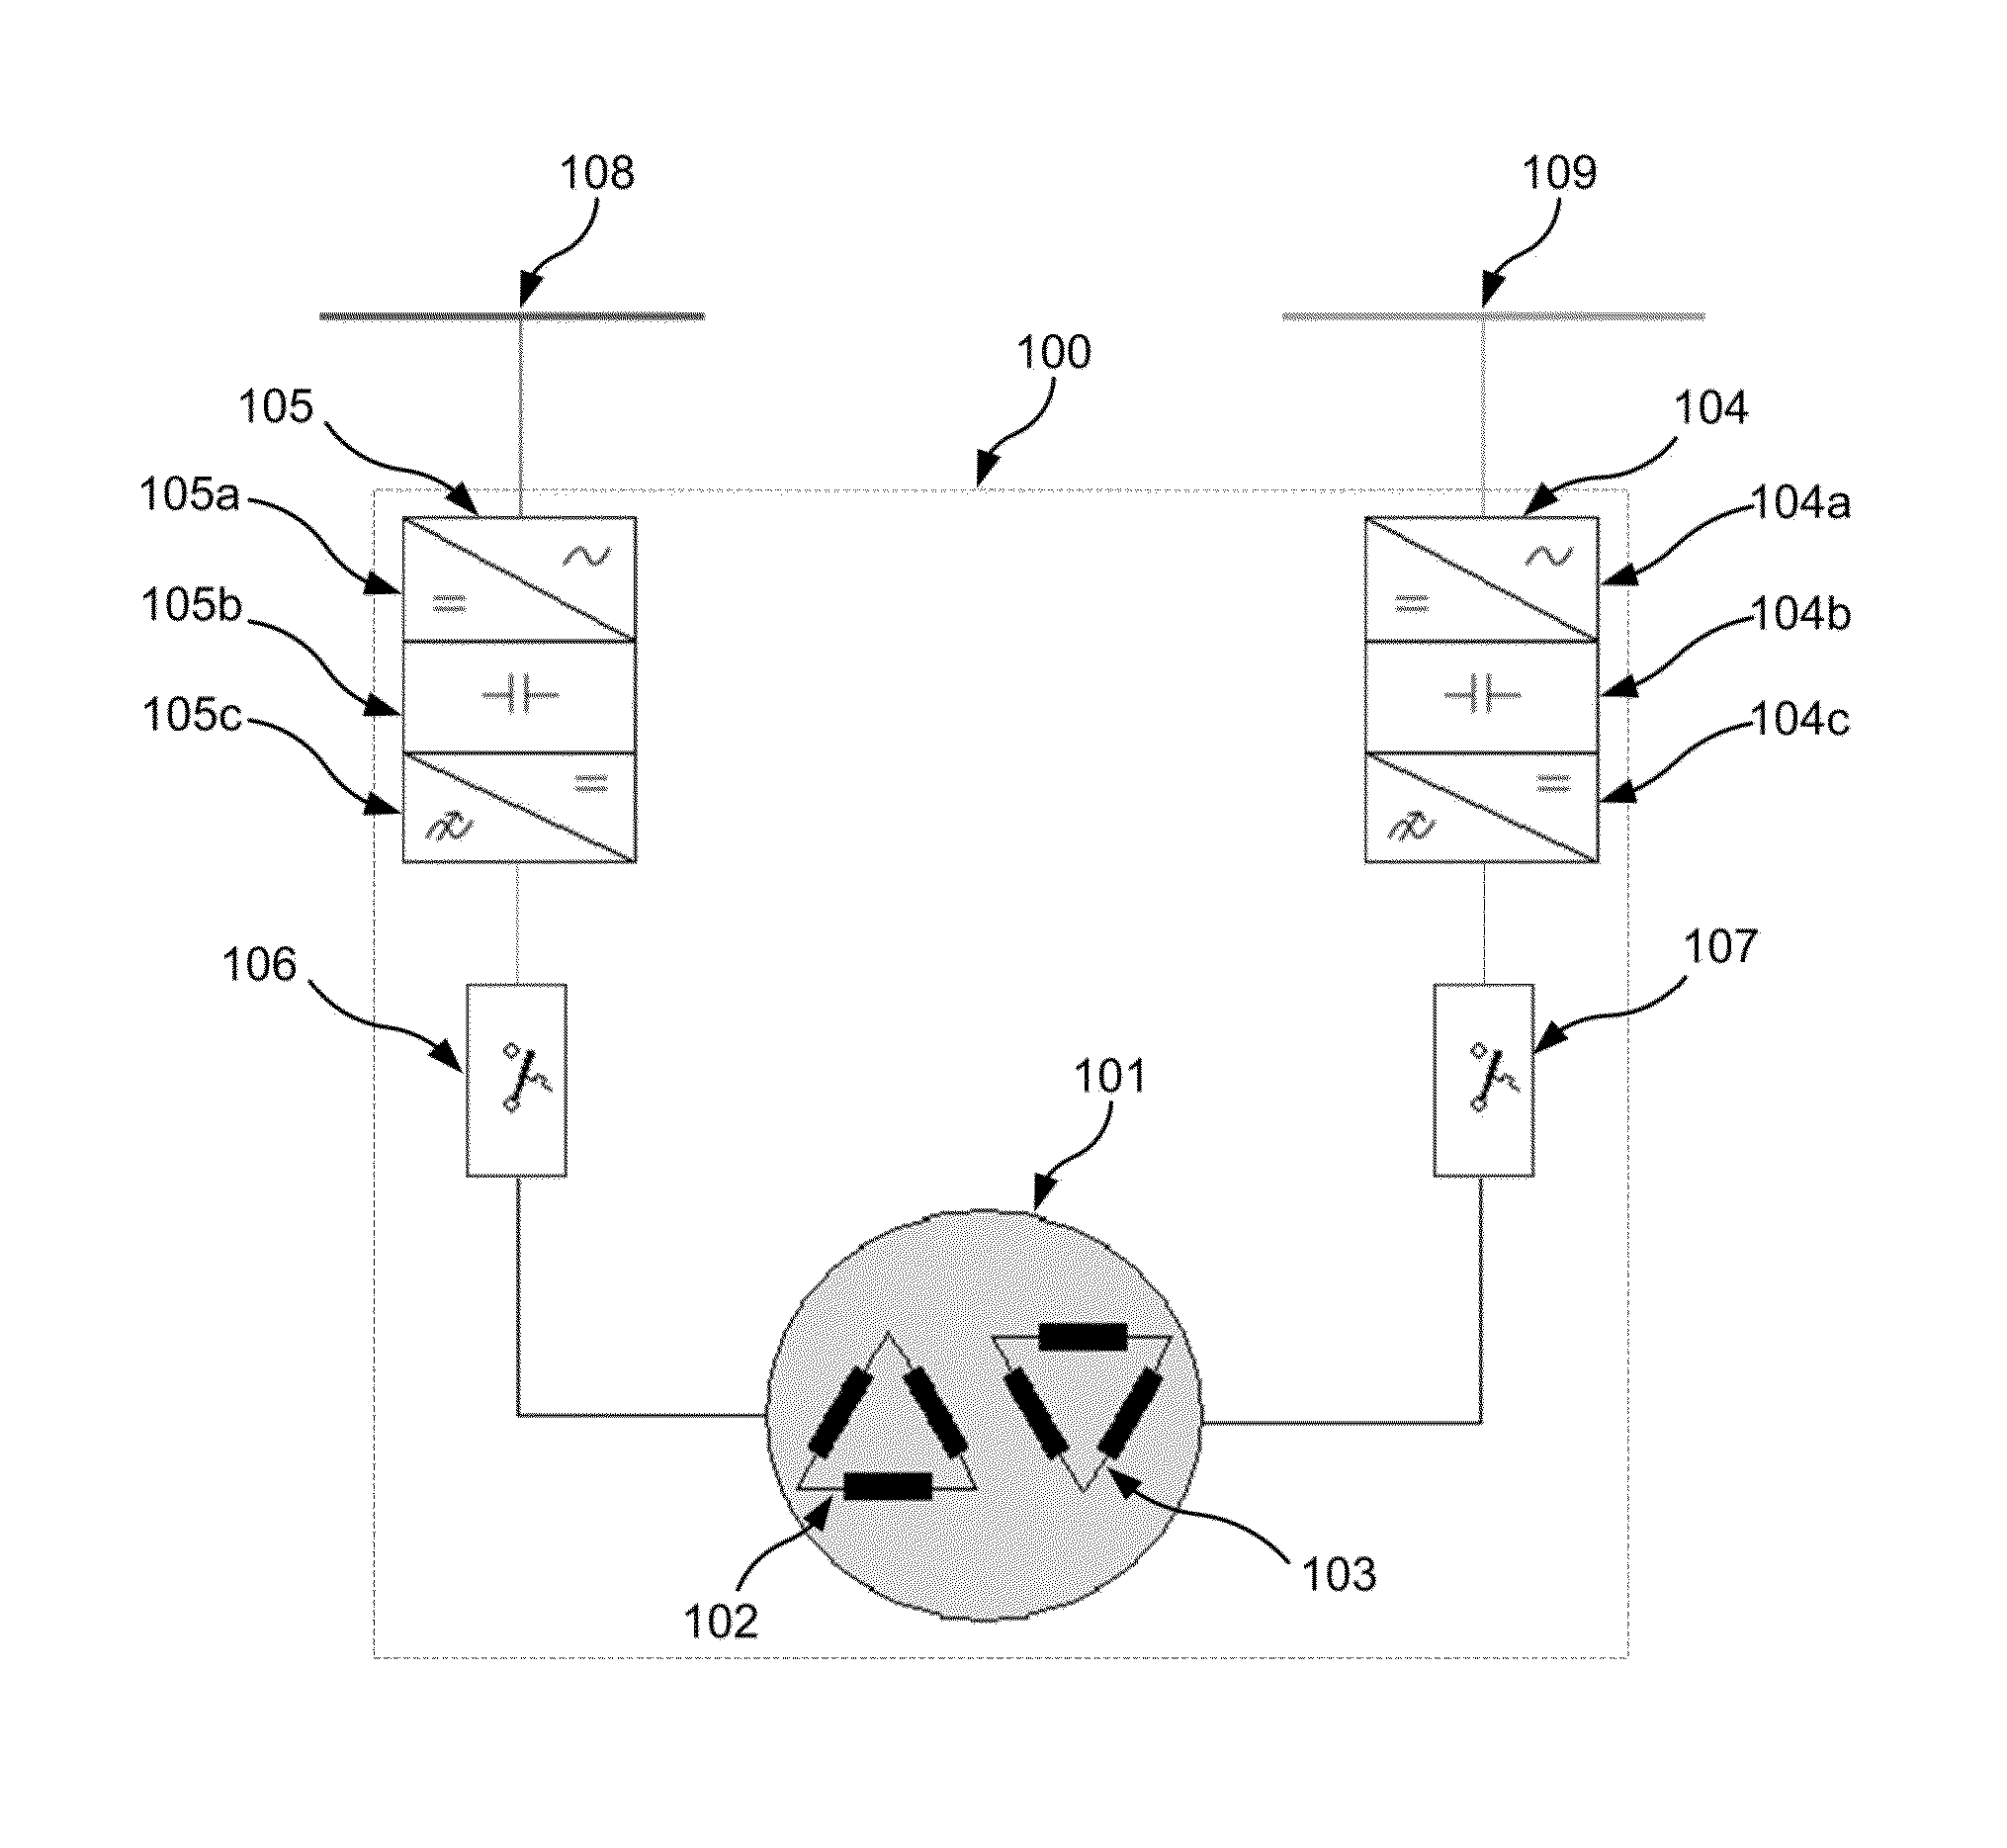 Blade pitch system with a dual winding actuator